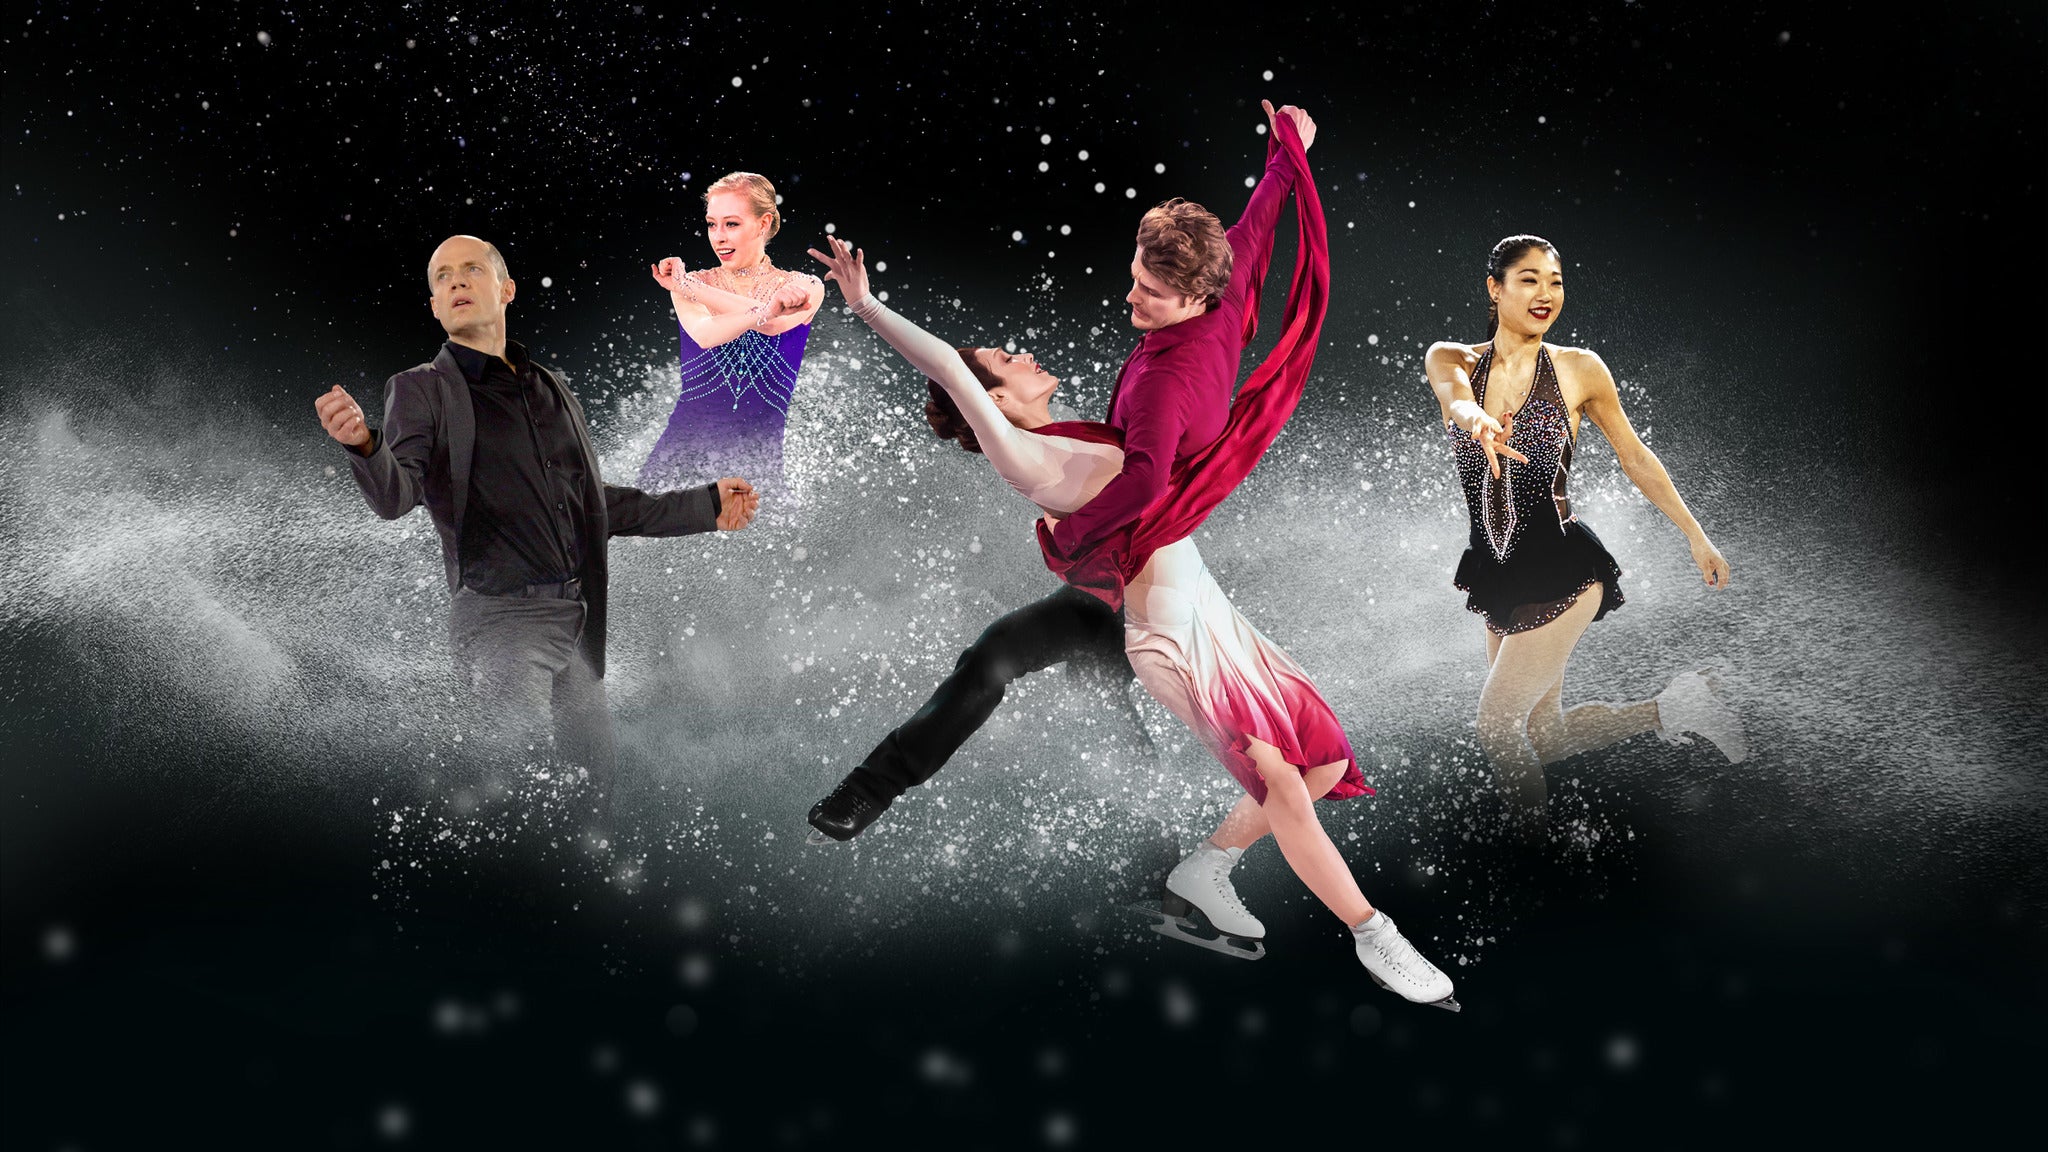 Stars On Ice Holiday - U.S. in Kitchener promo photo for Artist presale offer code